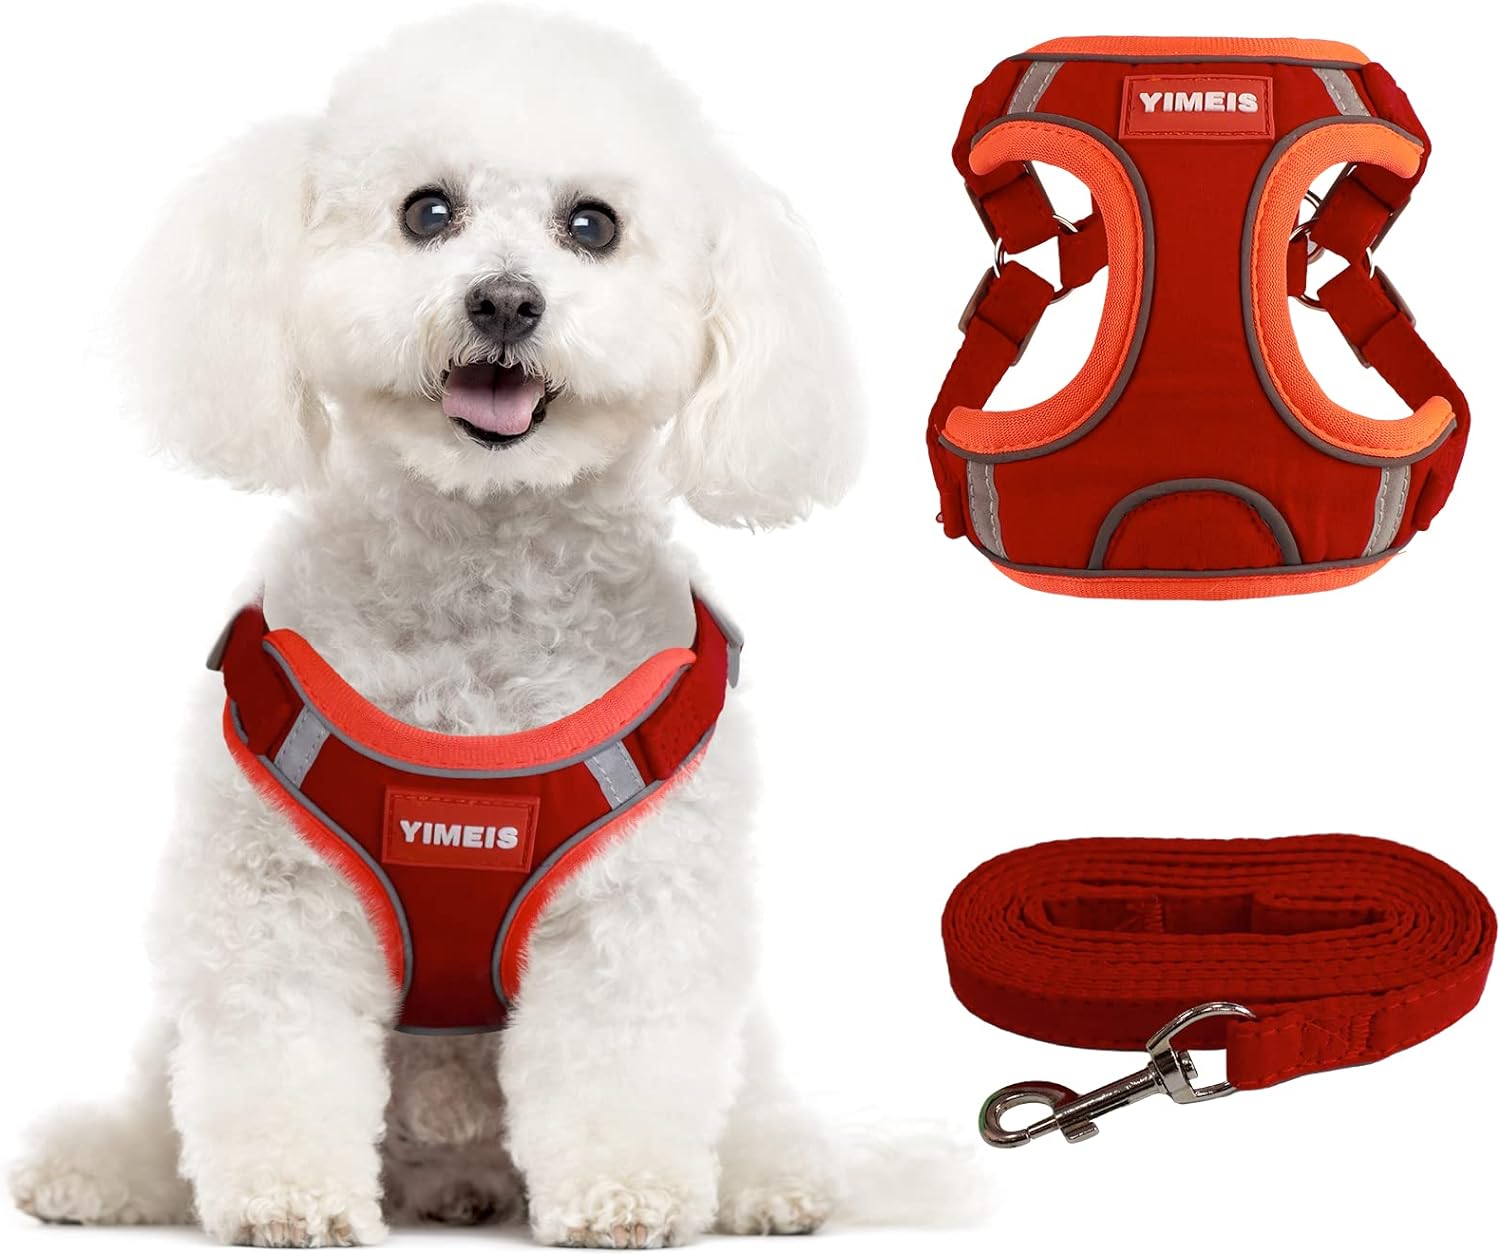 YIMEIS Dog Harness and Leash Set, No Pull Soft Mesh Pet Harness, Reflective Adjustable Puppy Vest for Small Medium Large Dogs, Cats (Red, Medium (Pack of 1)